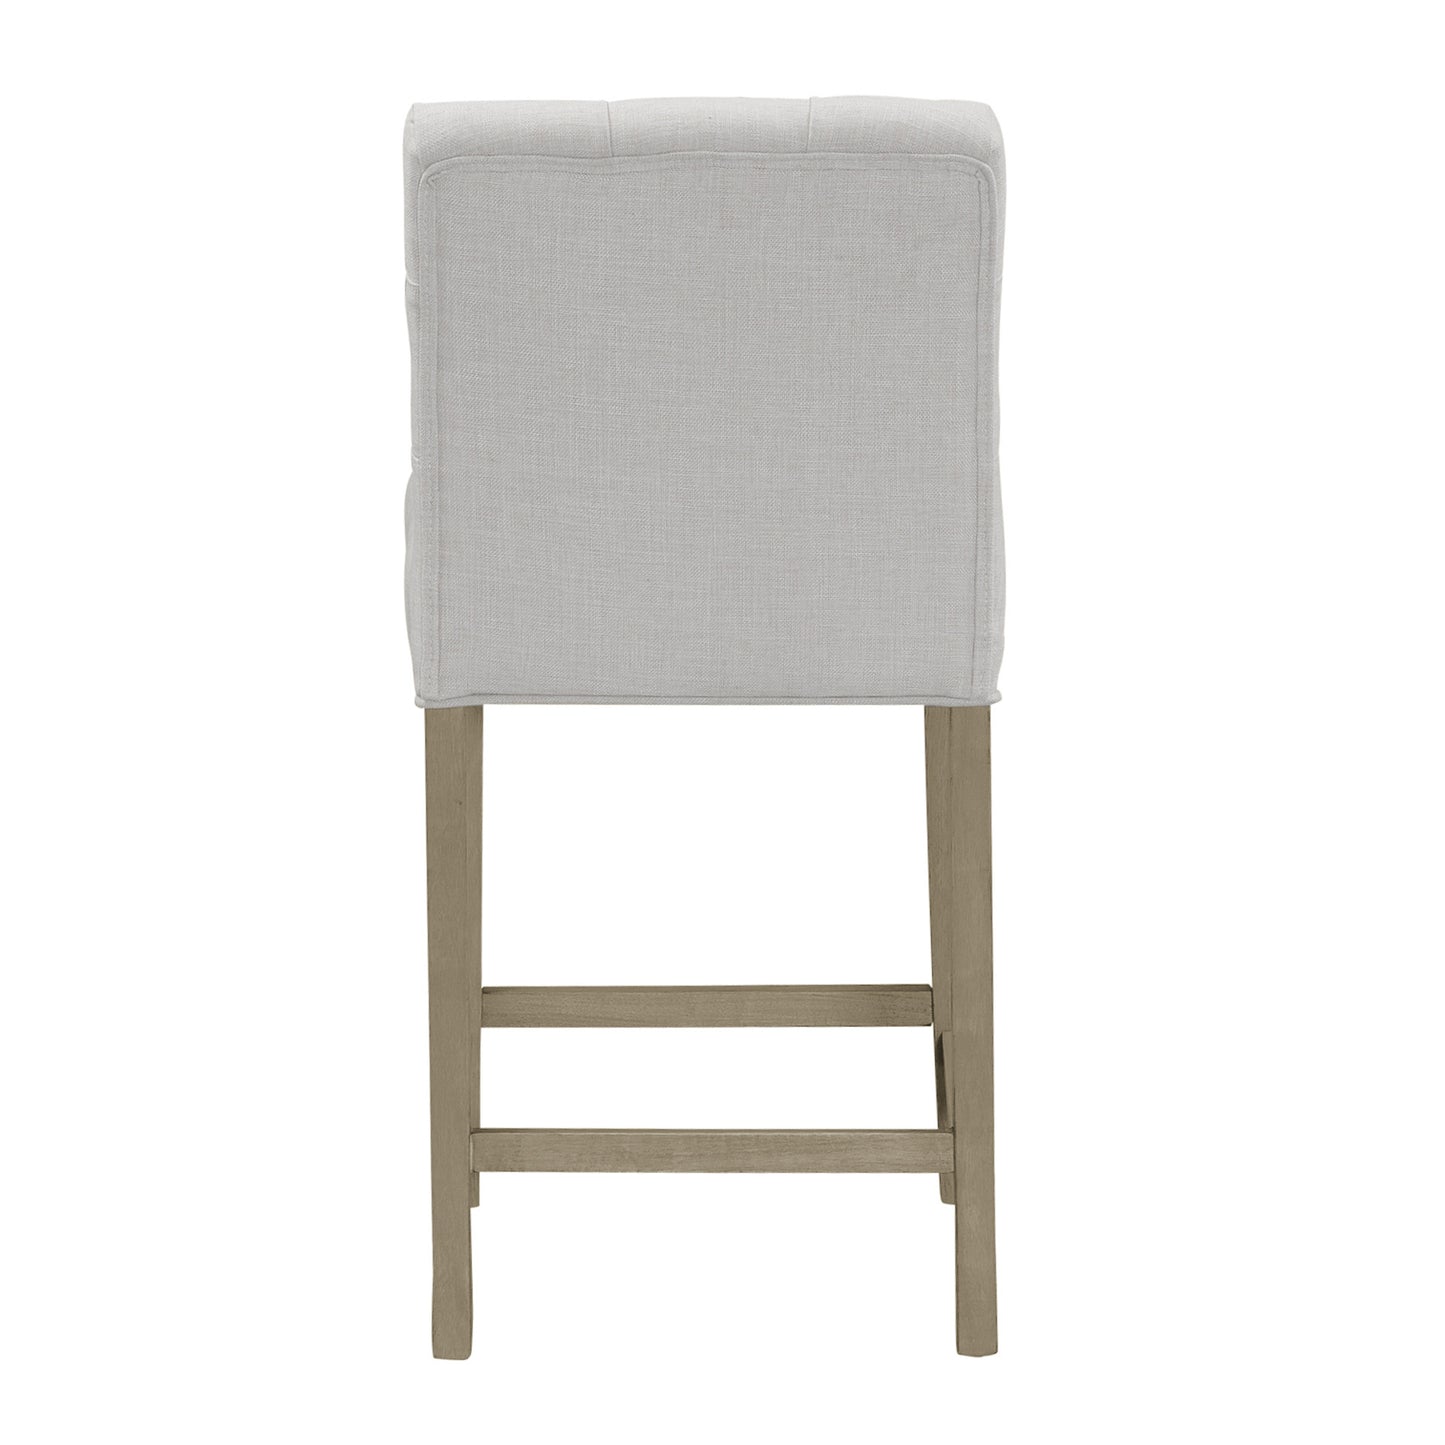 Set of 2 Aled Beige Fabric Counter Stool with Side Wings and Tufted Buttons